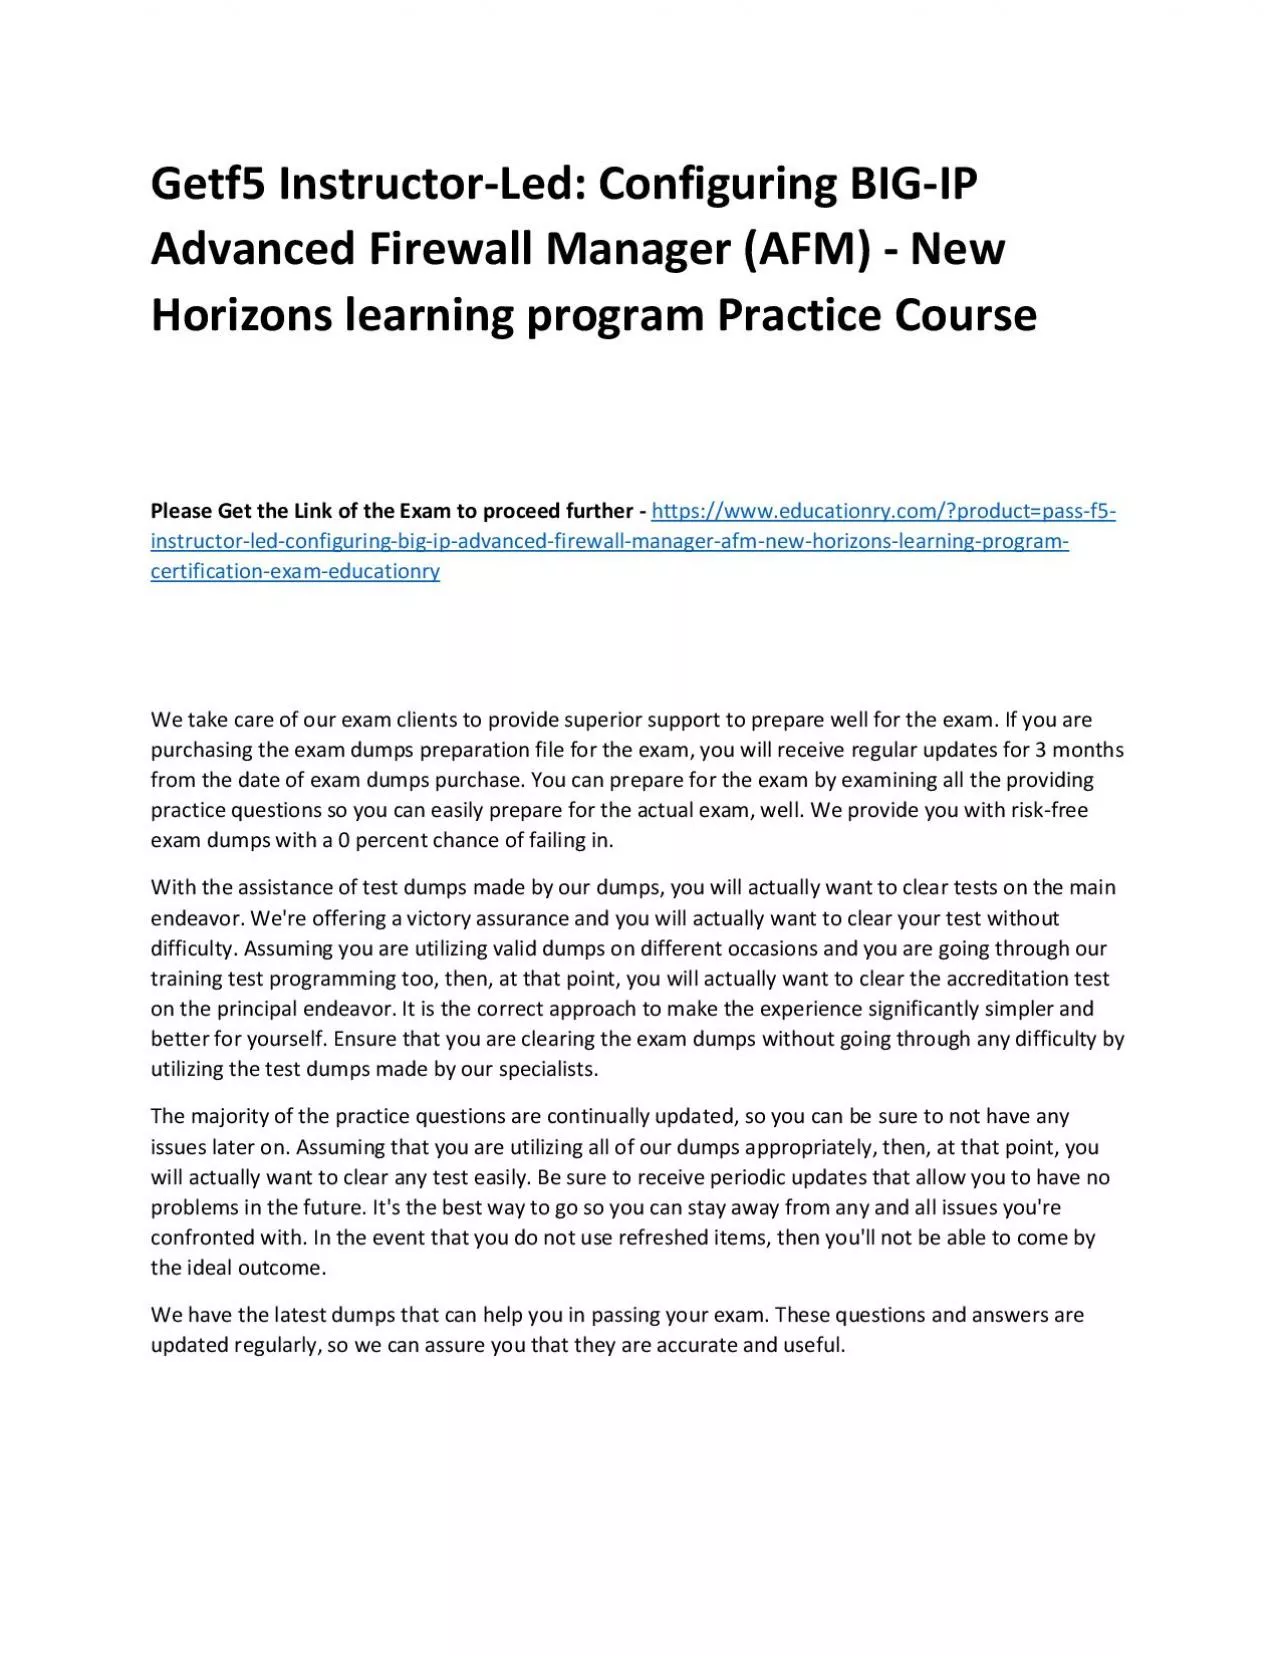 f5 Instructor-Led: Configuring BIG-IP Advanced Firewall Manager (AFM) - New Horizons learning